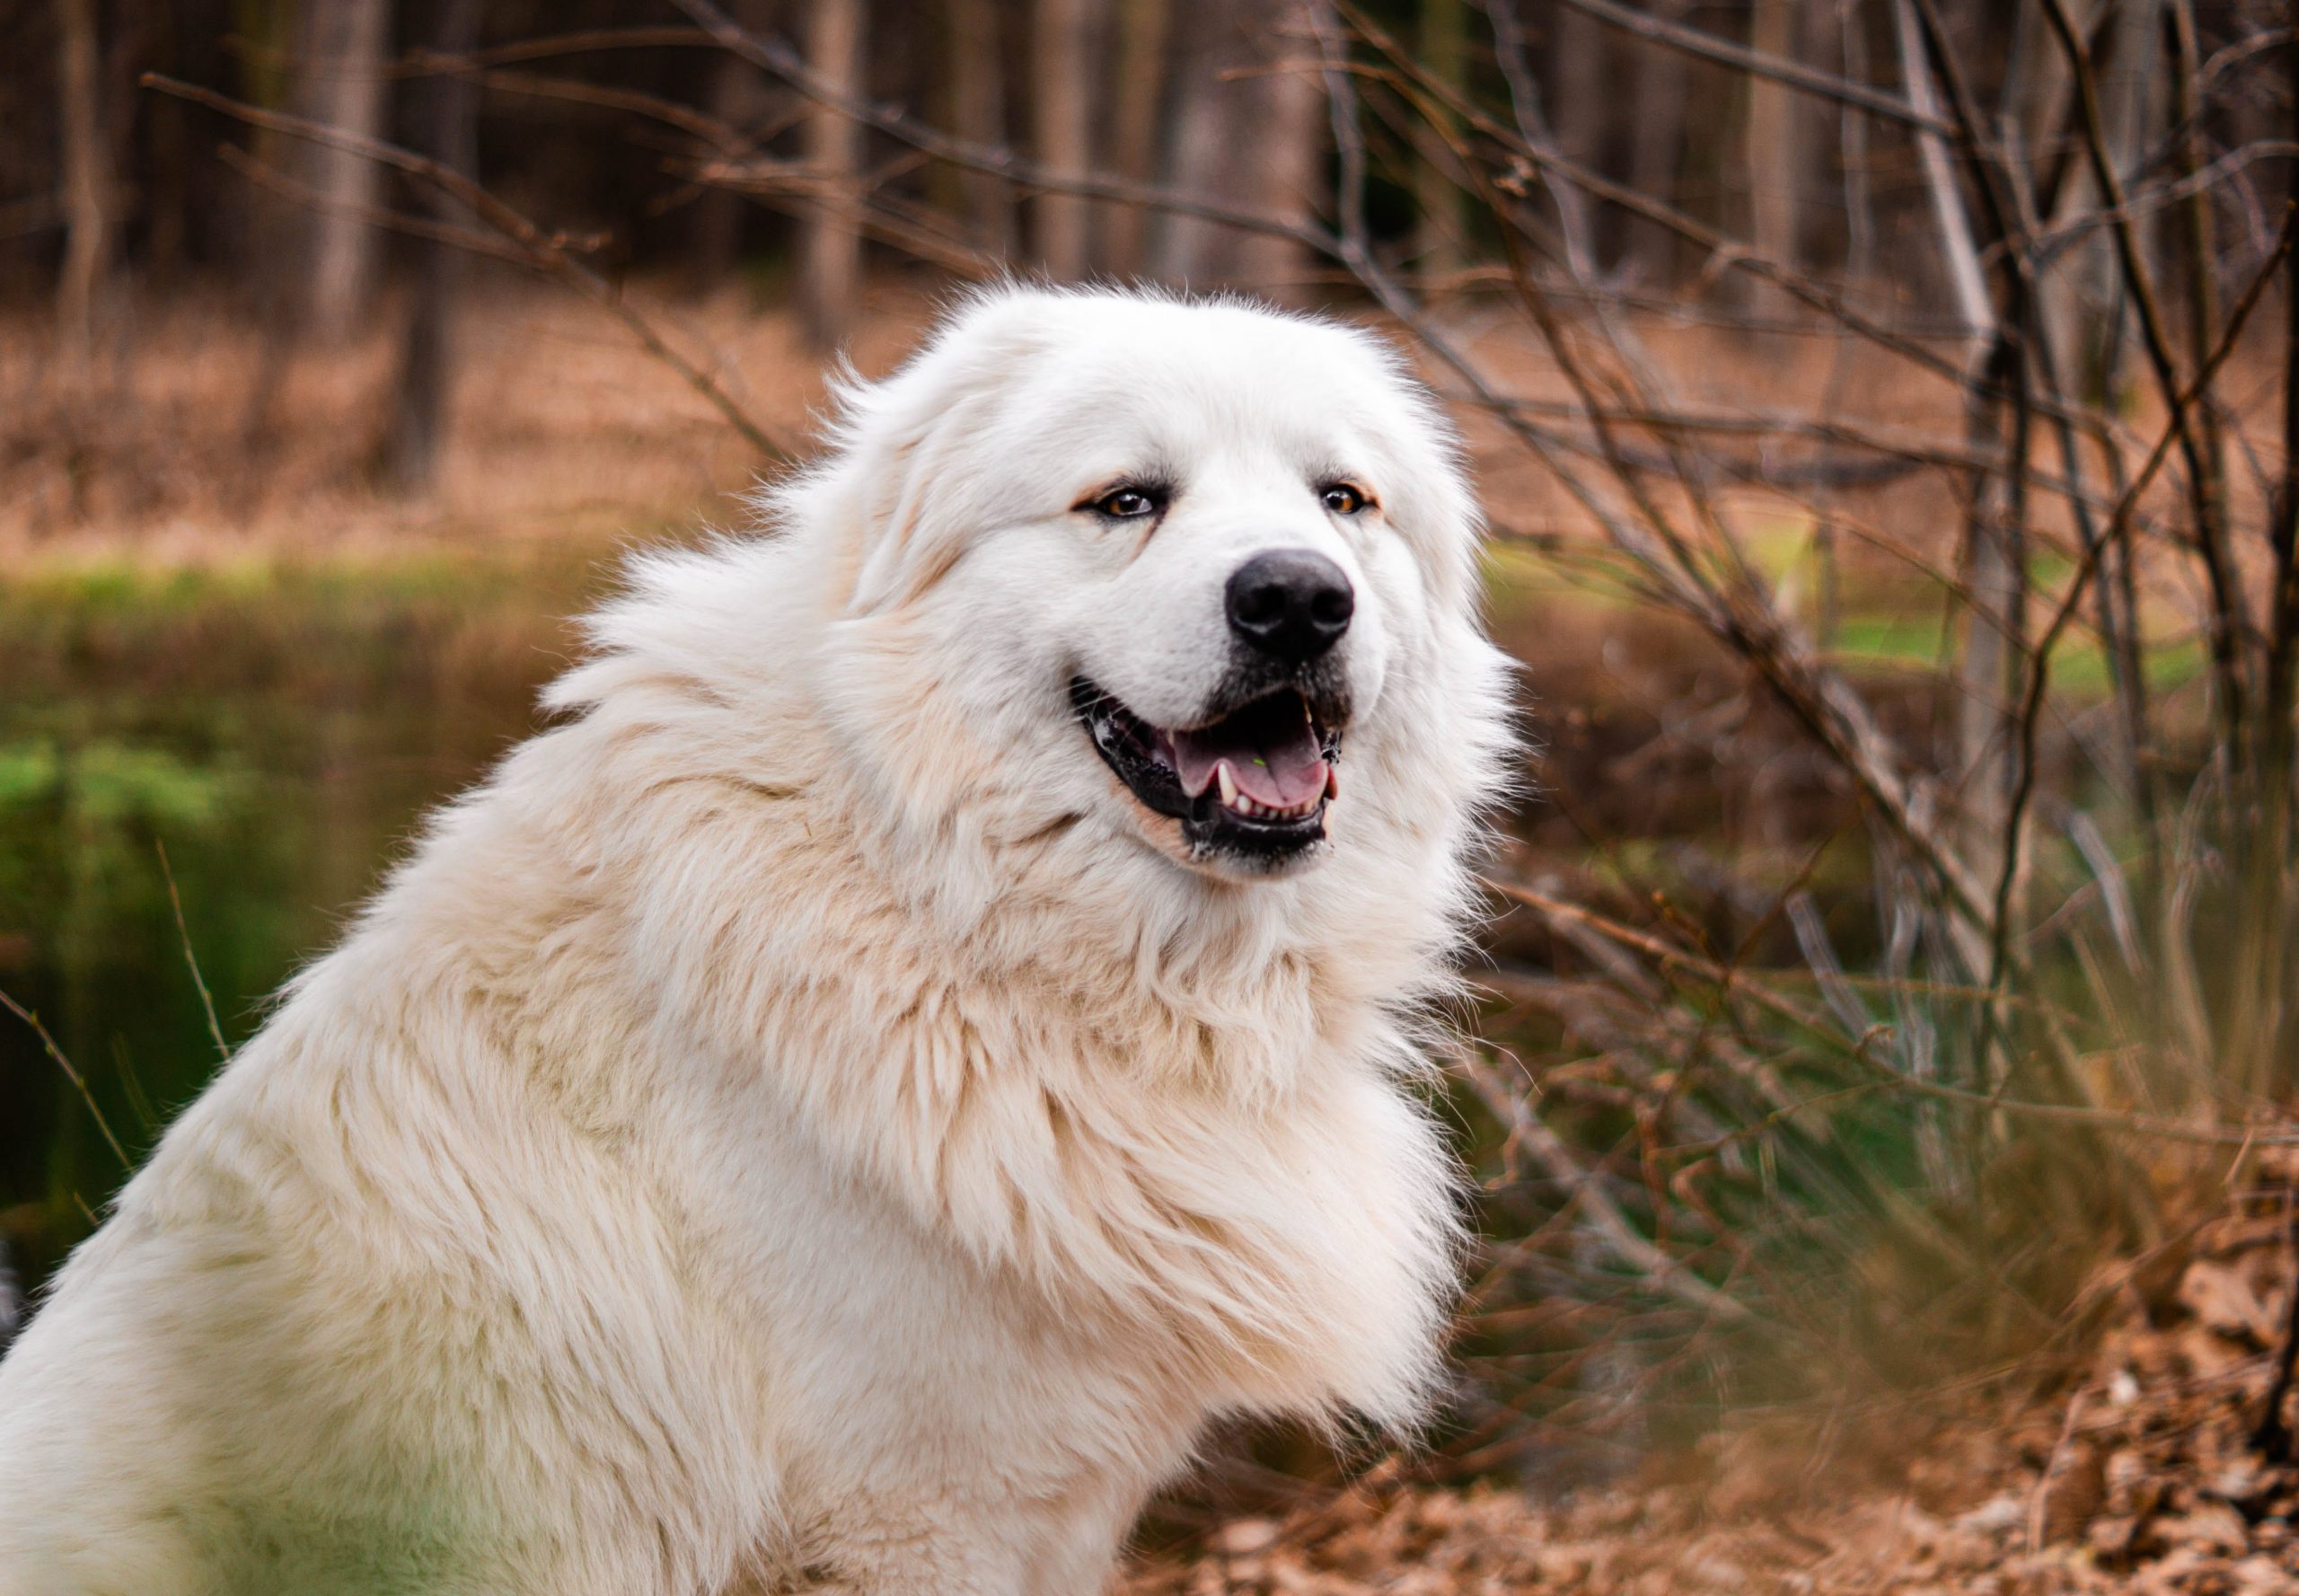 Are Great Pyrenees The Worst Dog? – Food for Thought